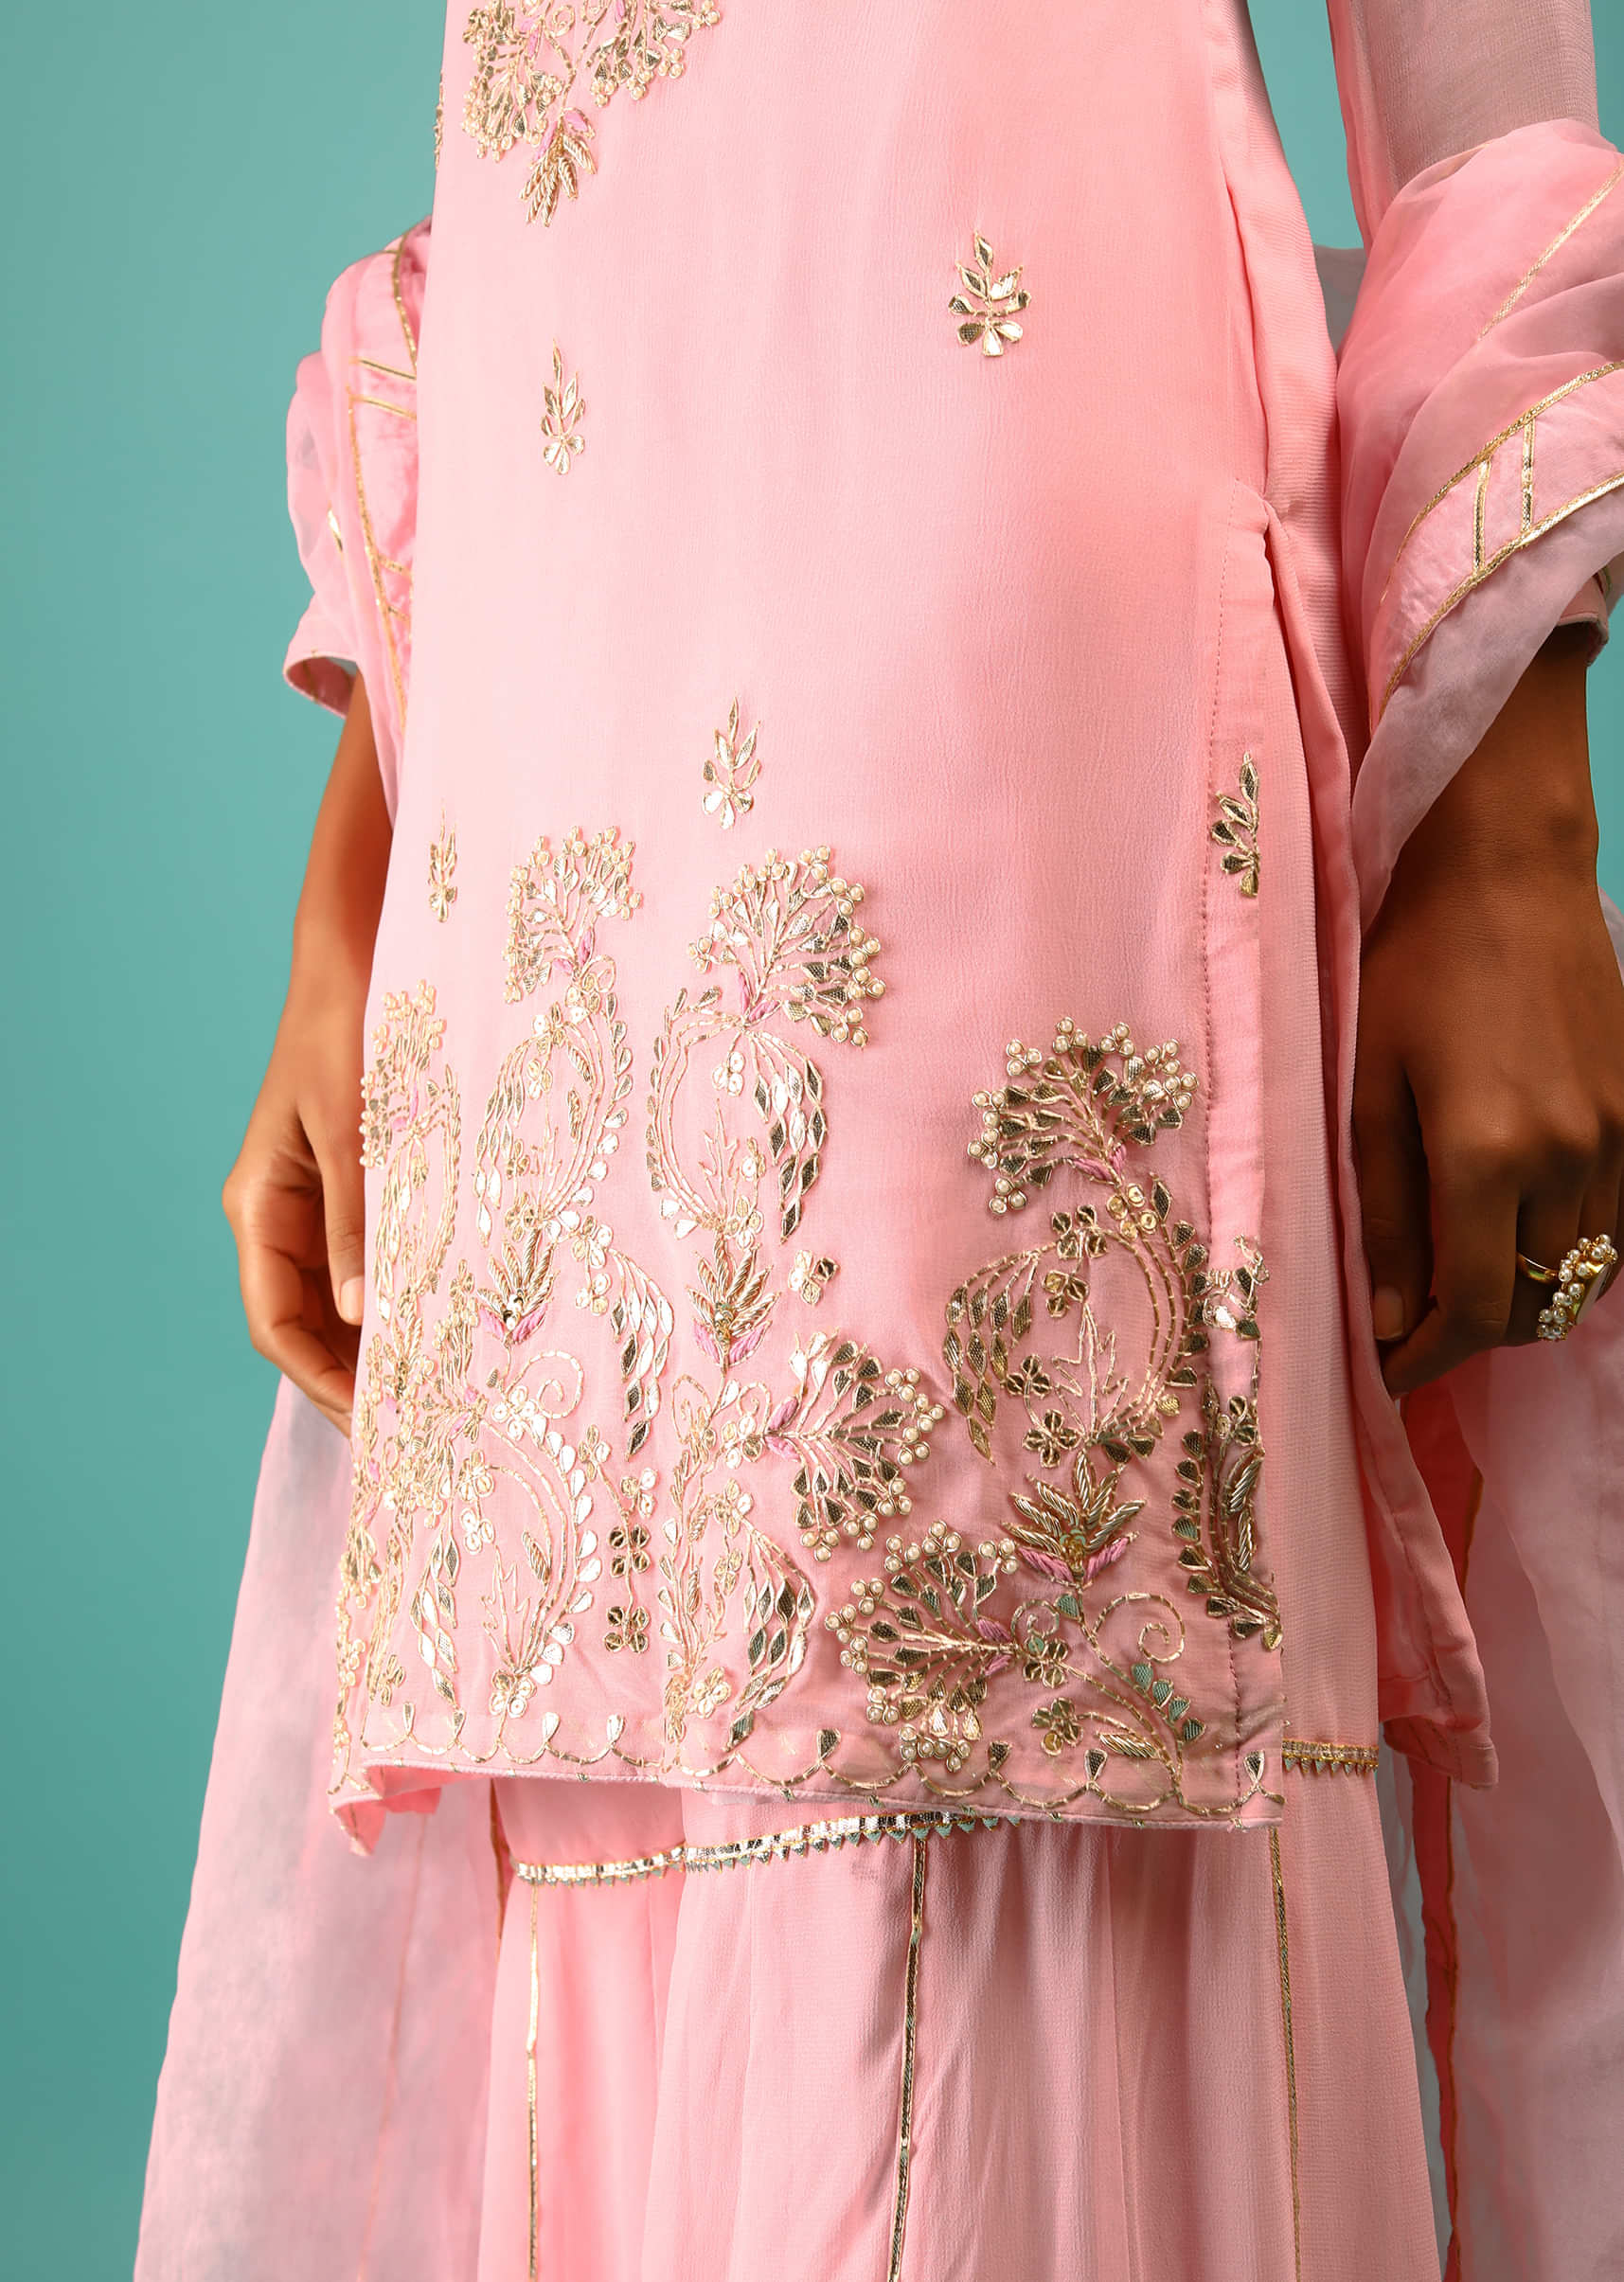 Rose Pink Sharara Suit In Georgette With Three Quarter Sleeves And Gotta Patti Embroidery